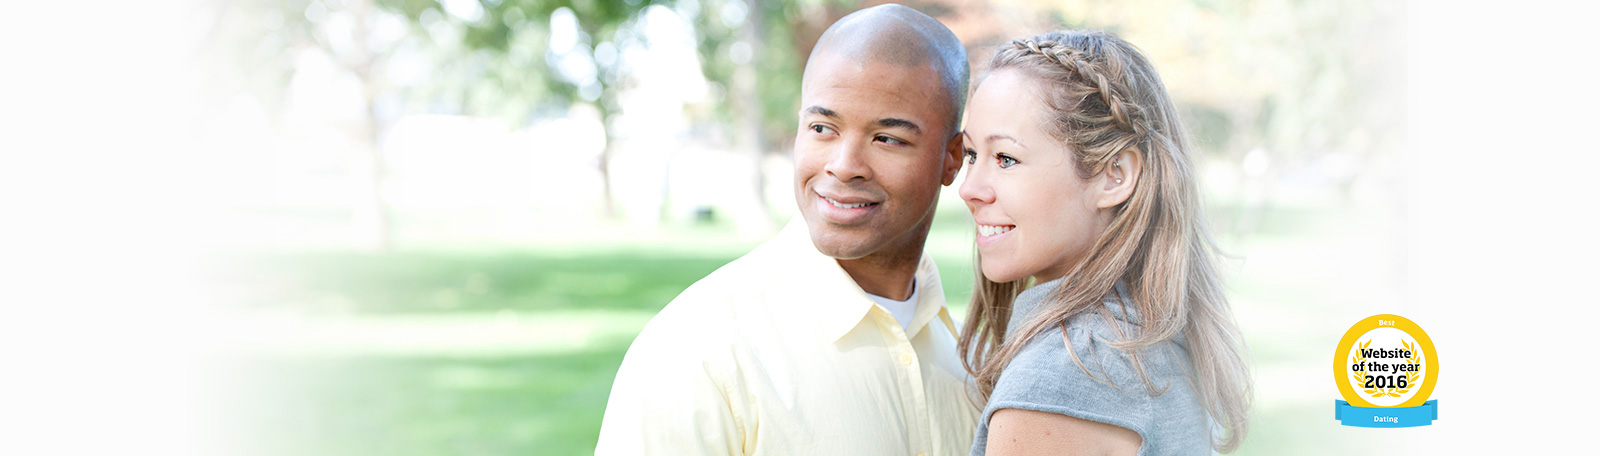 Mixed Race Dating - Interracial dating in the UK: meet singles today!